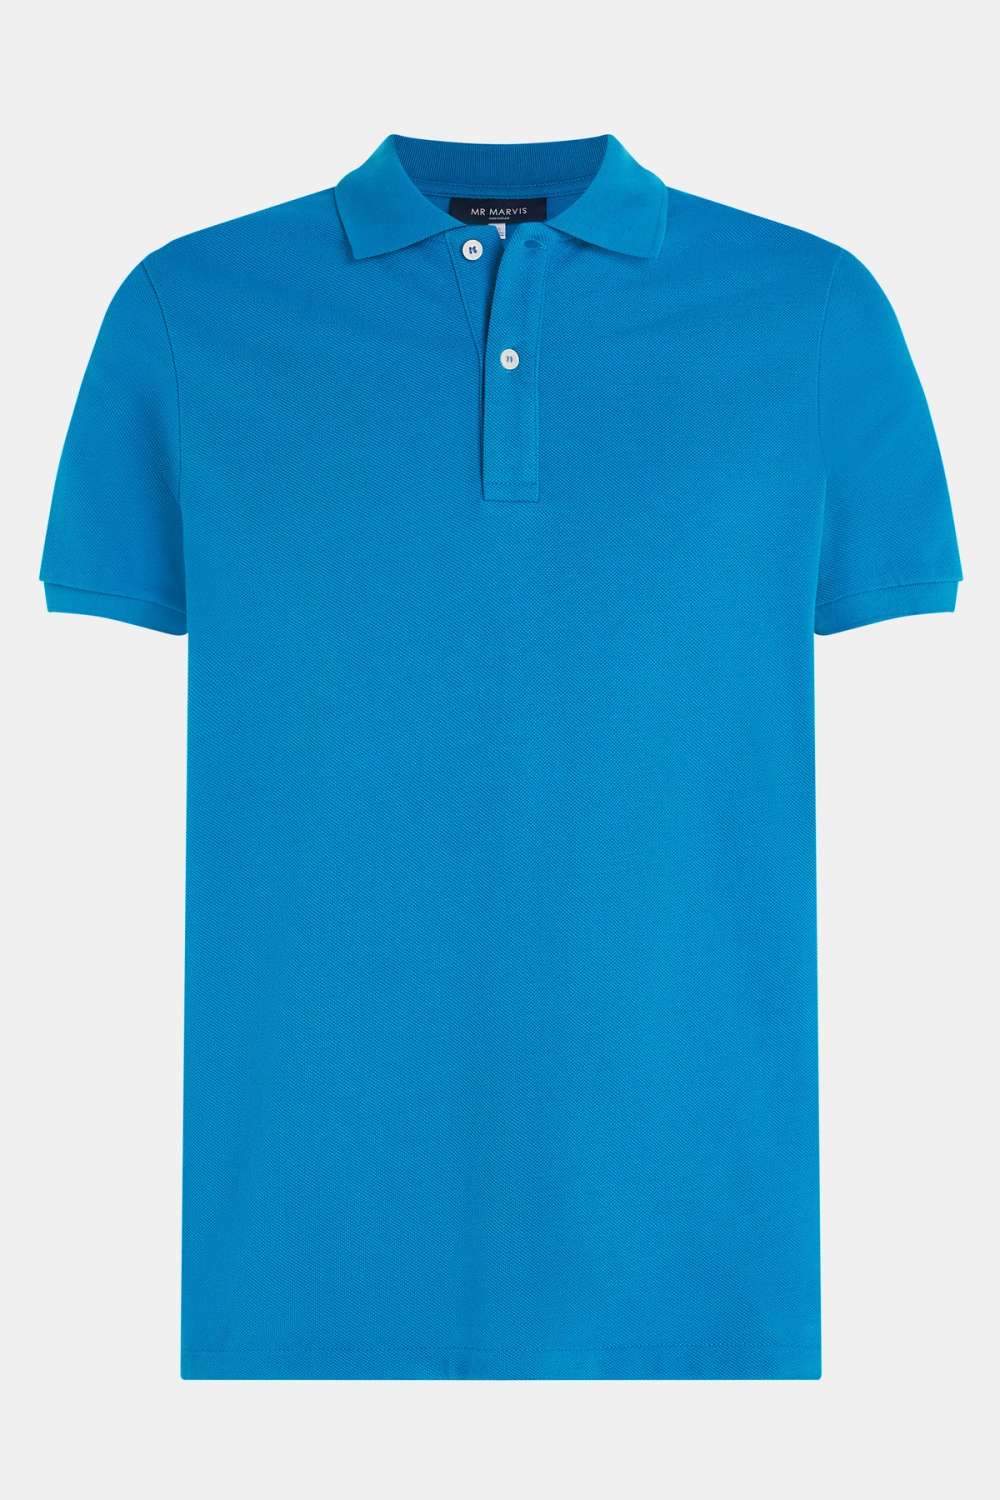 Poolsiders * The Classic Polo